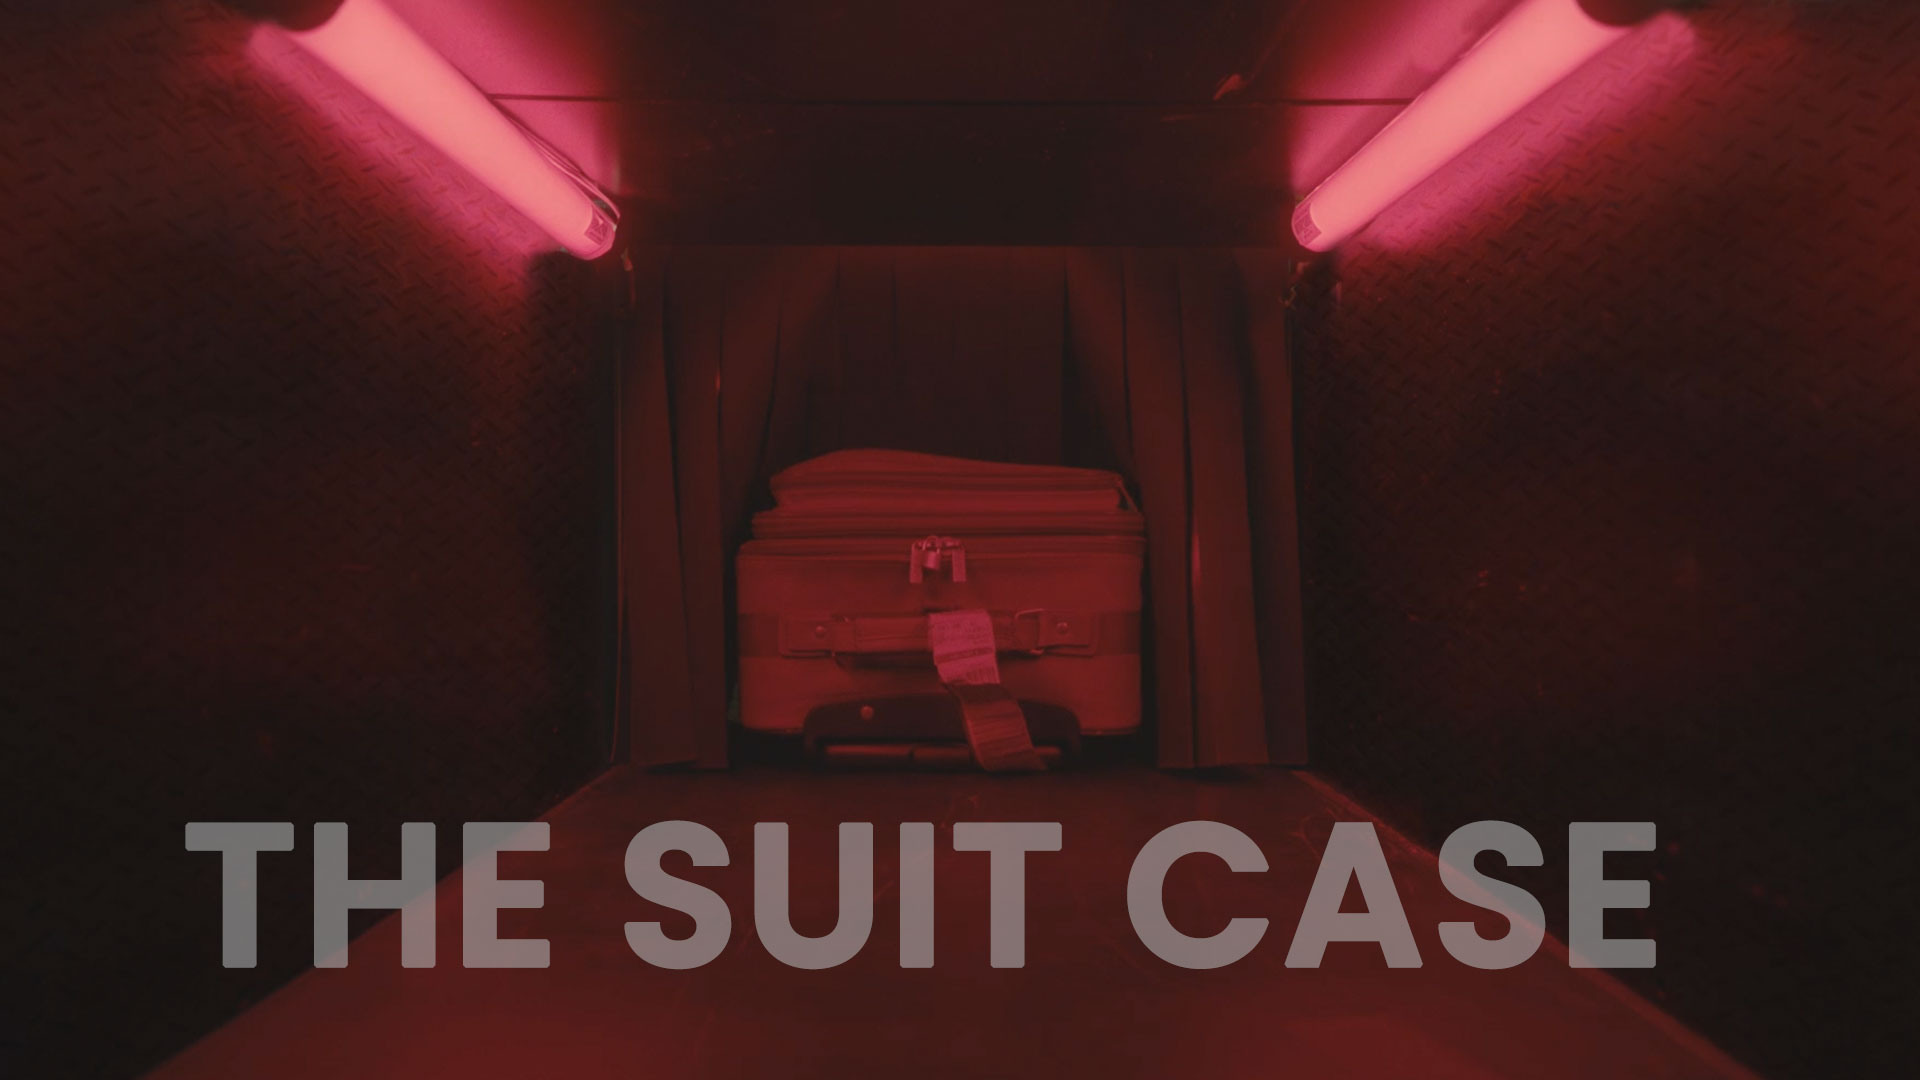 THE SUITCASE